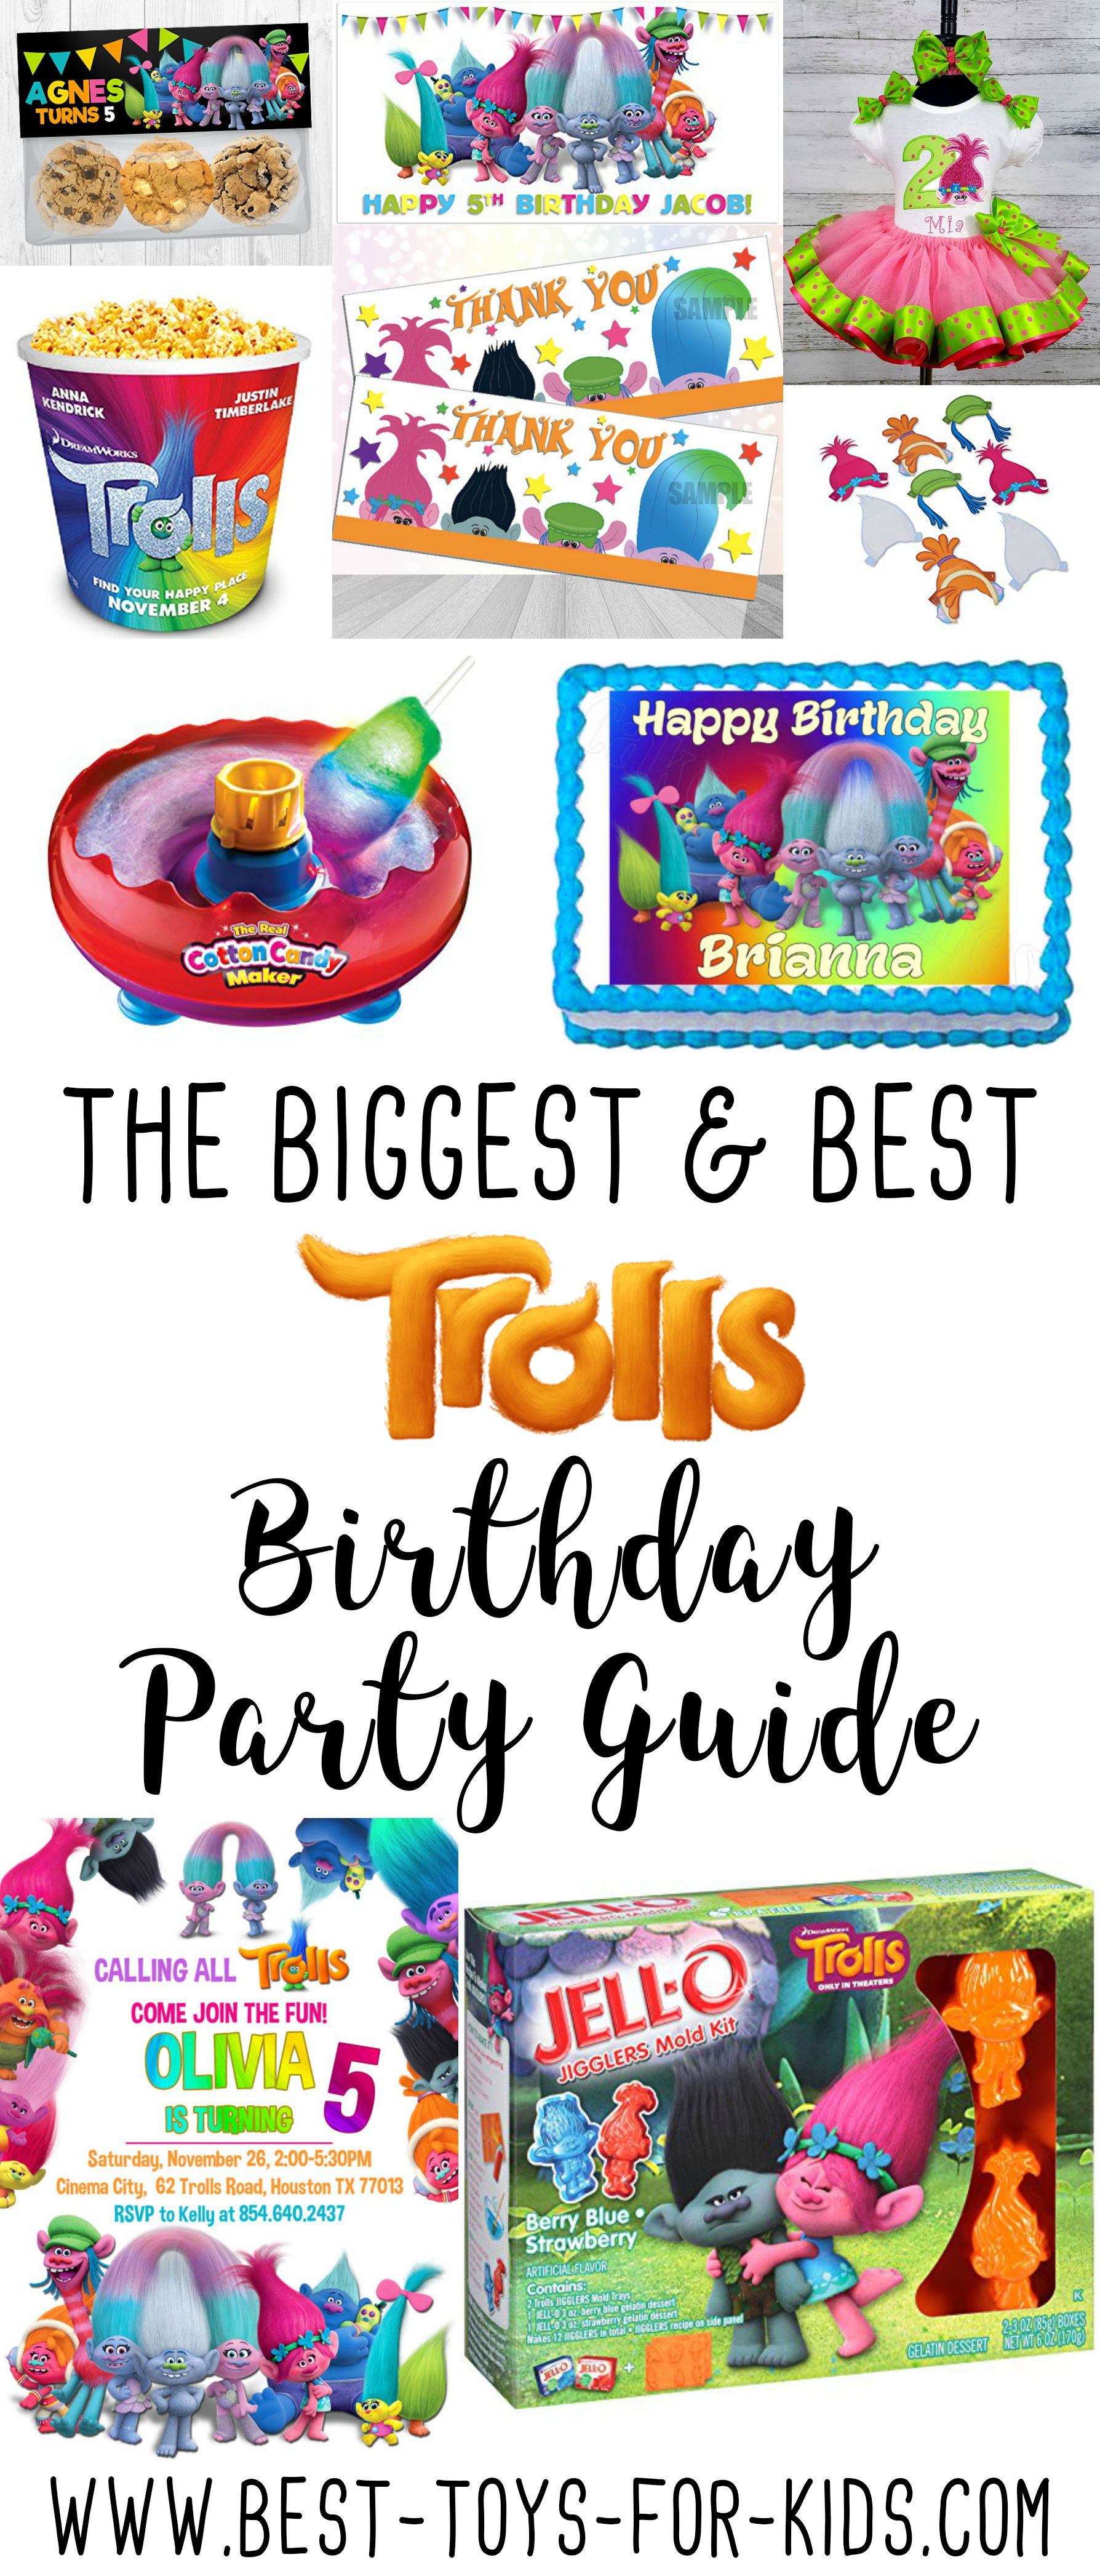 Dreamworks Trolls Party Ideas
 The BIGGEST And BEST Dreamworks Trolls Birthday Party